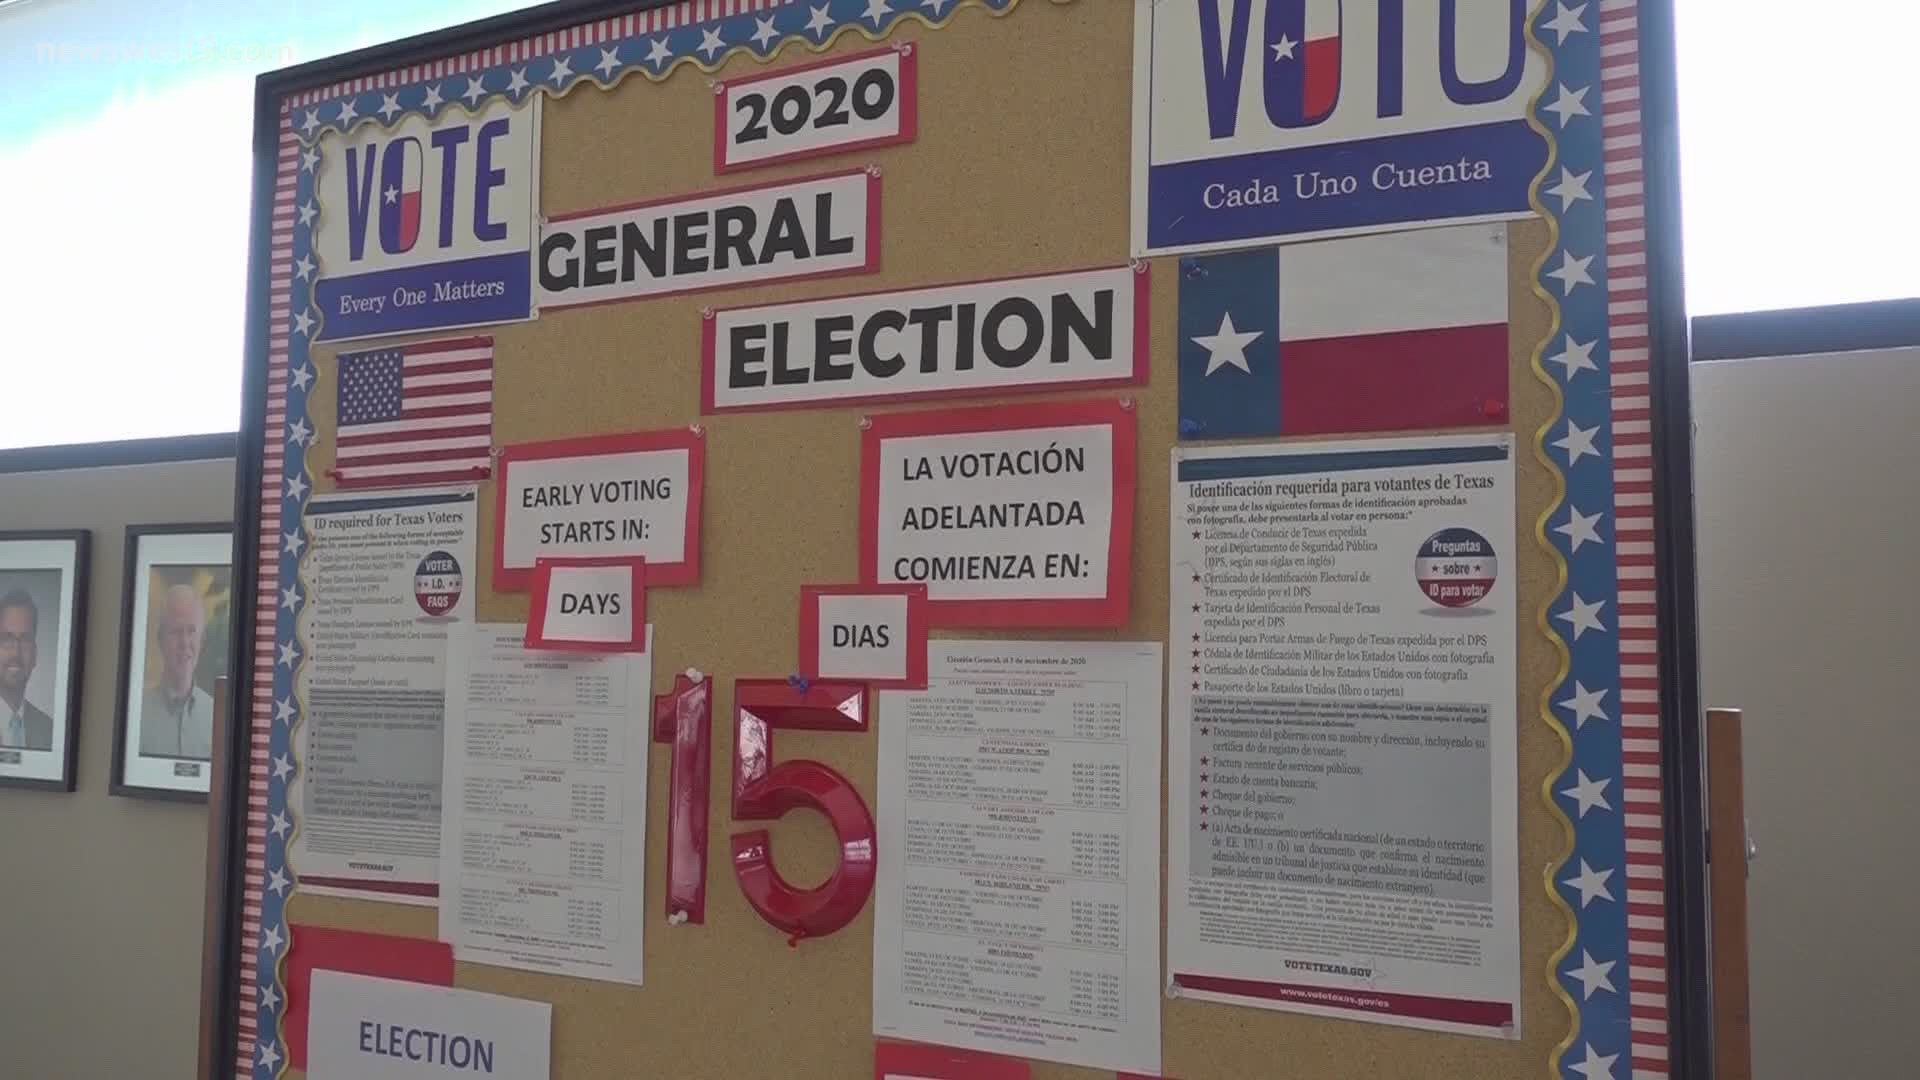 Midland County is expecting close to 5,000 mail-in ballot submissions.